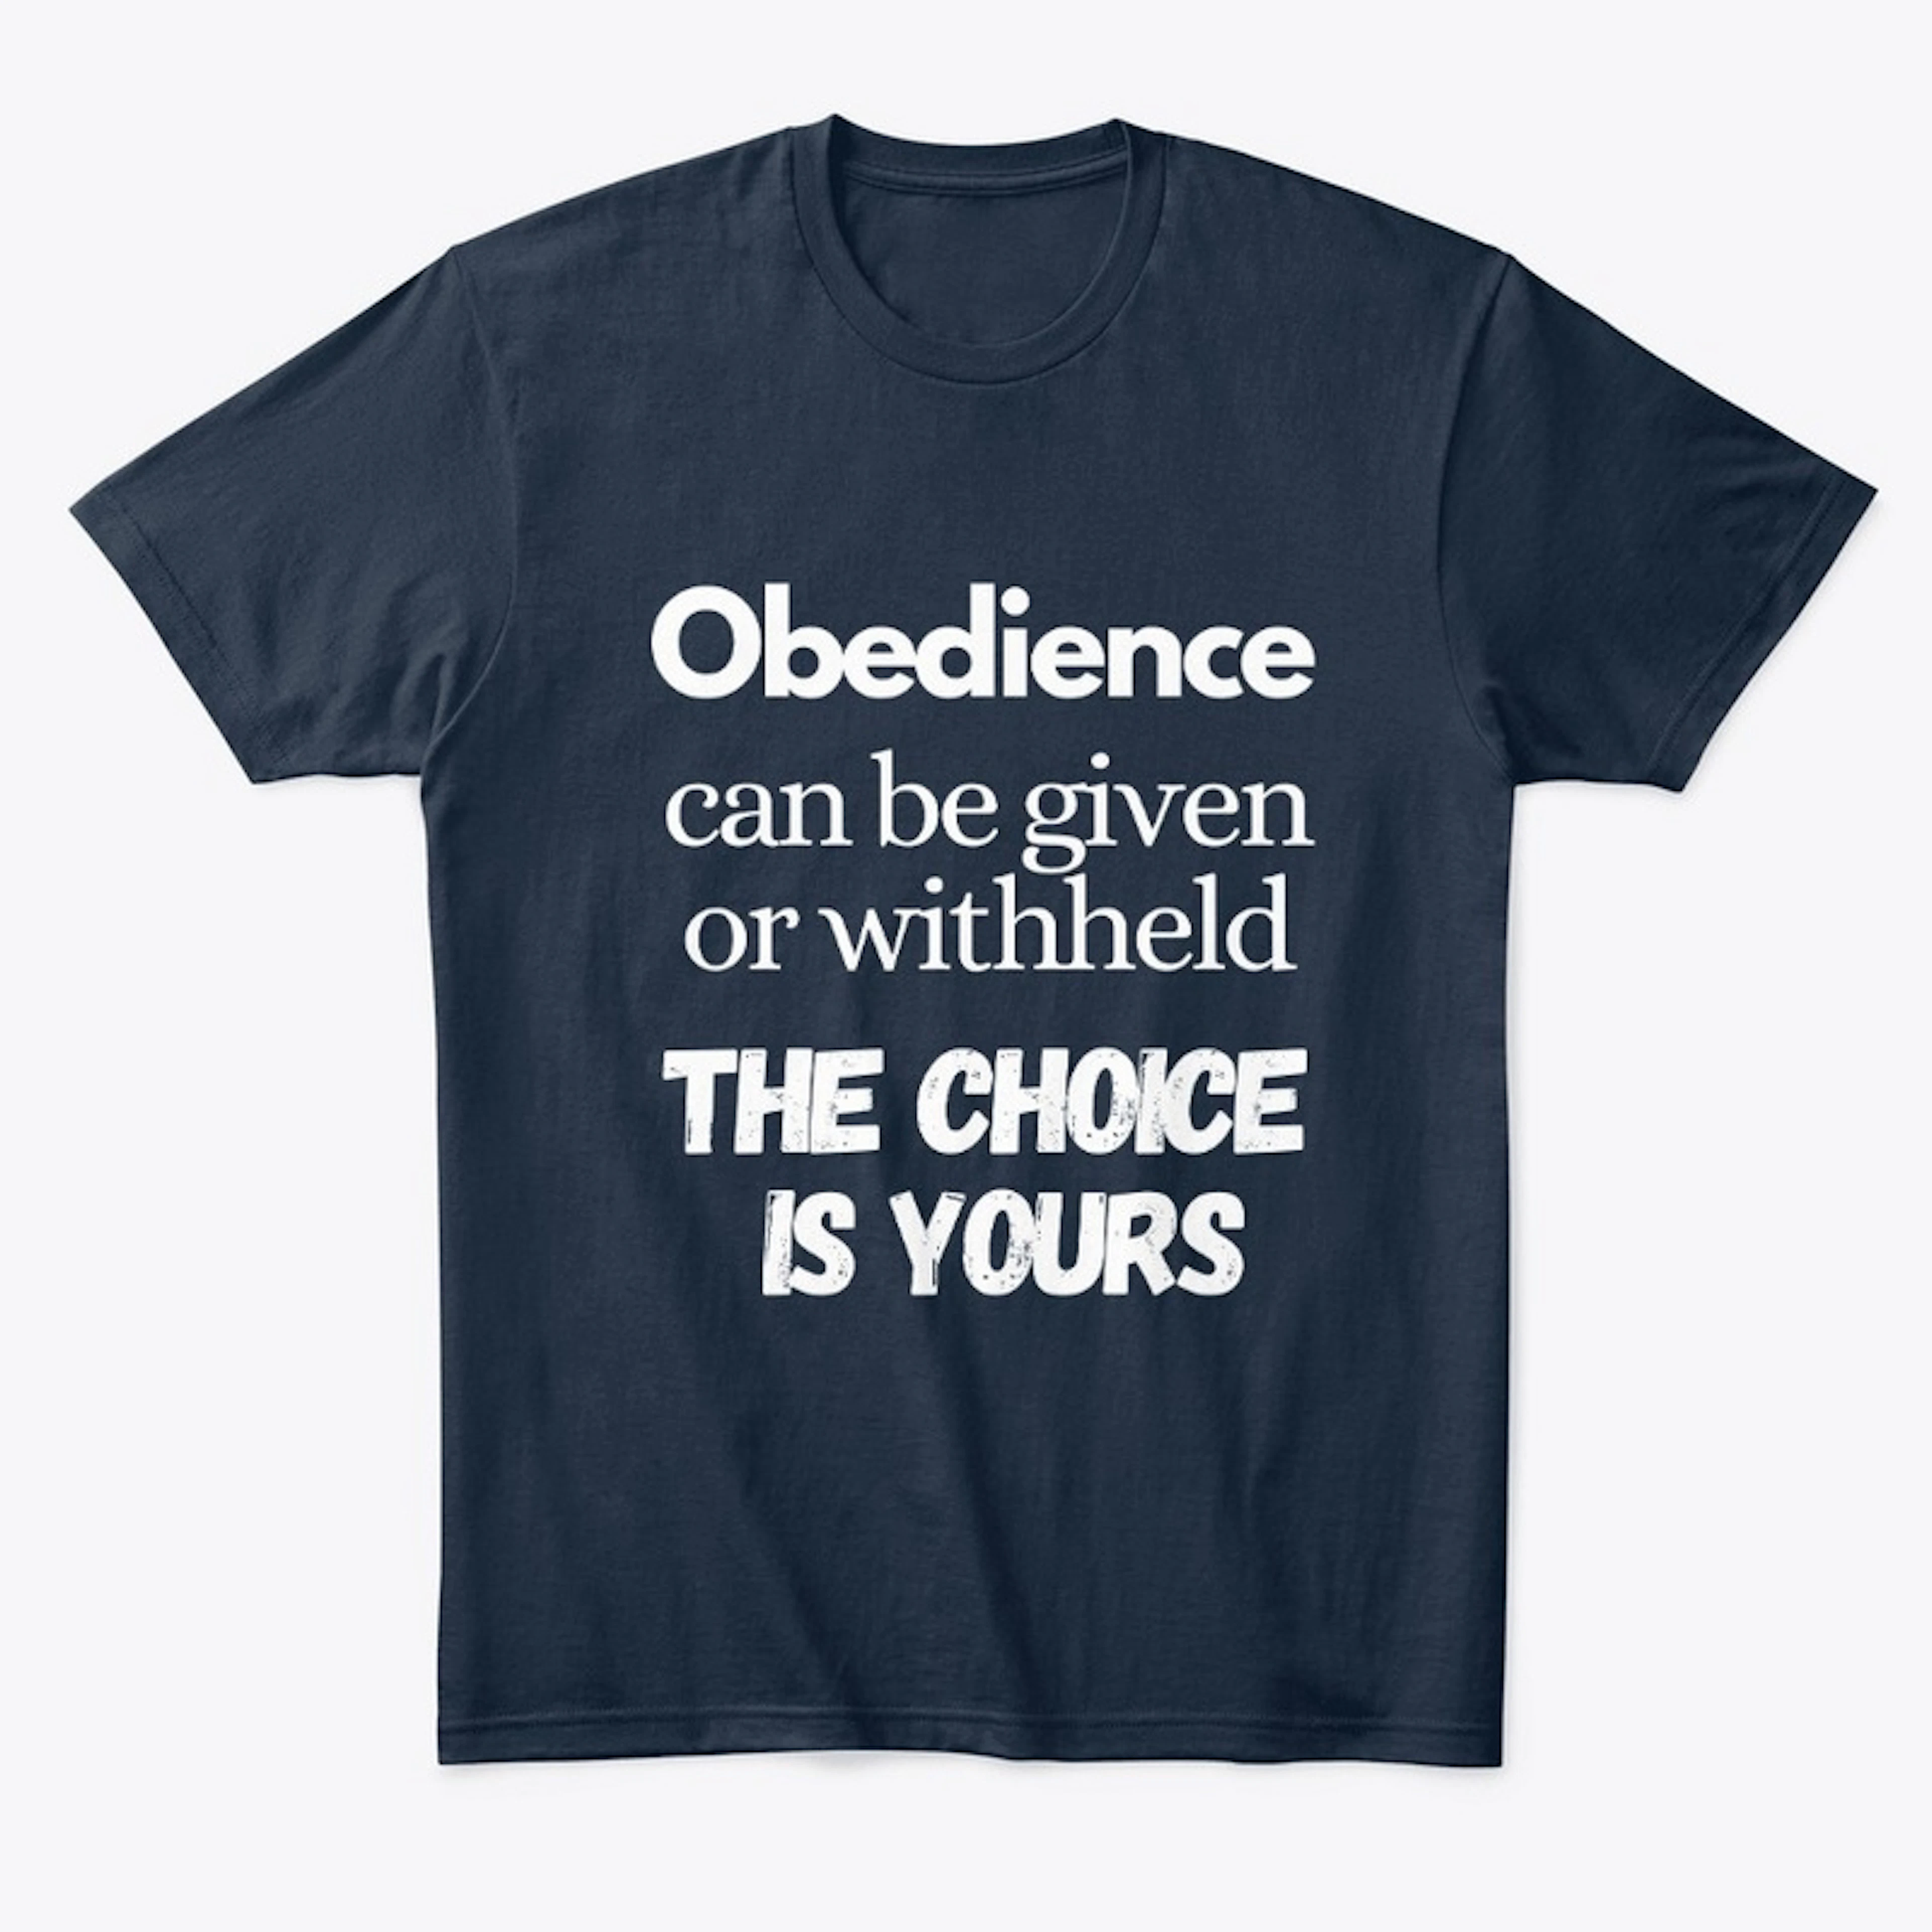 Obedience given or withheld